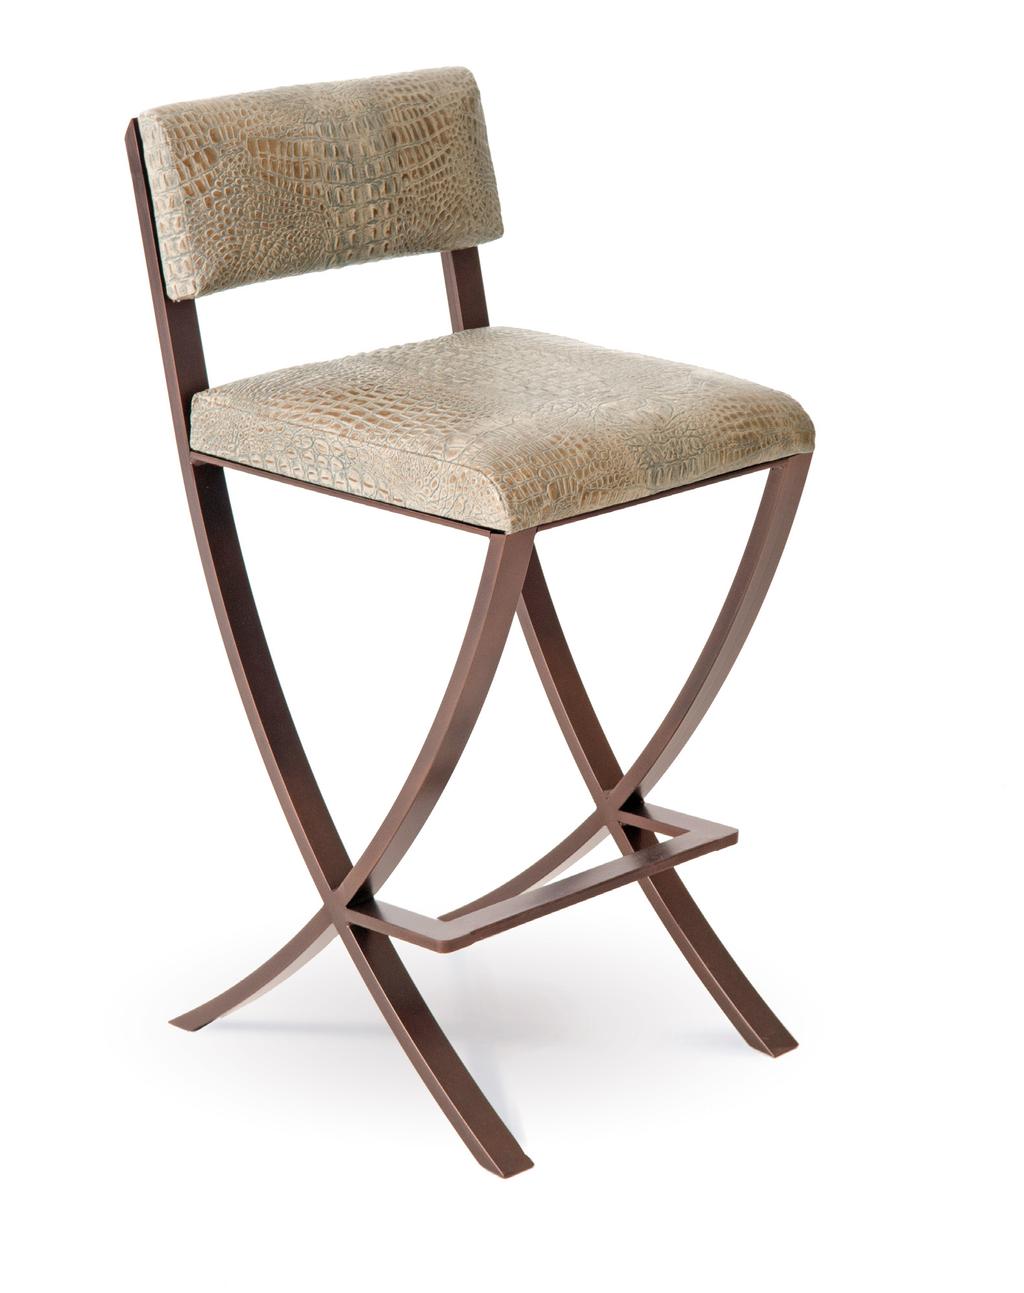 C966 Naples Counterstool Shown in Oil-Rubbed Bronze (78) with a Stone Gate Croc Leather